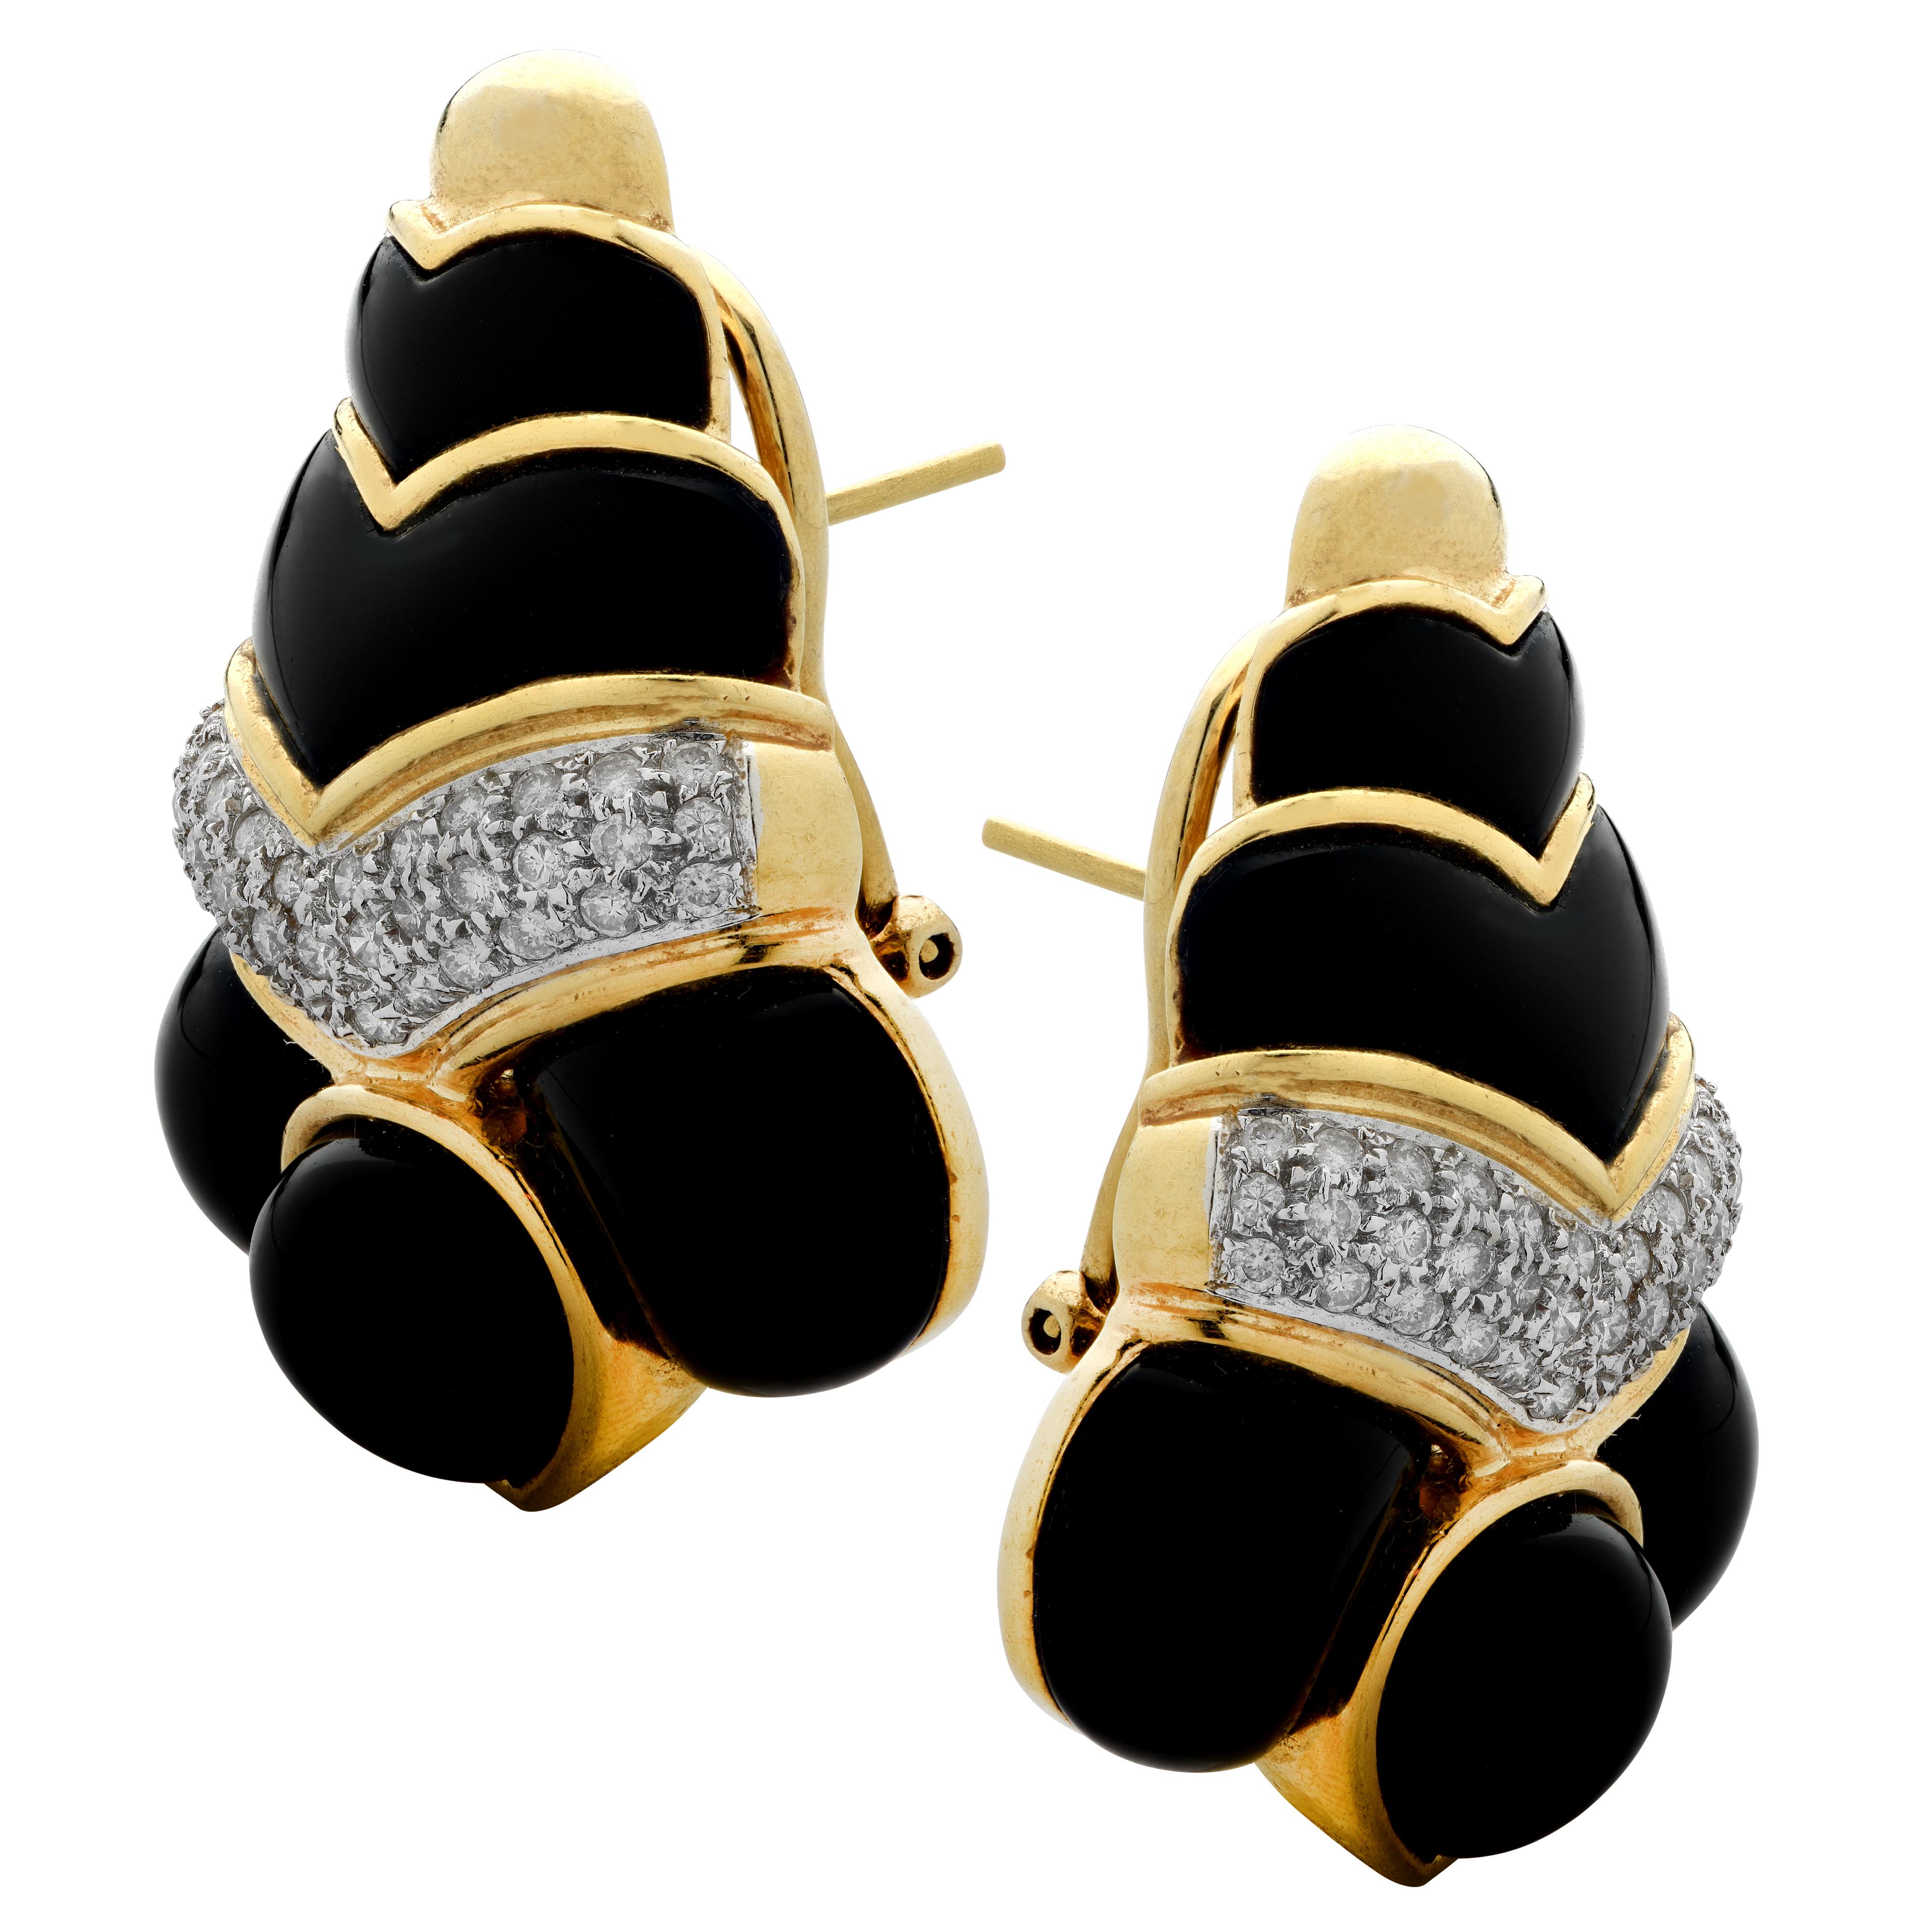 Stunning earrings crafted in 18 karat yellow gold, adorned with 74 round brilliant cut diamonds weighing approximately 1 carats total, G color, VS-SI clarity, pave set, and onyx cabochons, set in a triangular design. These earrings measure 1.38